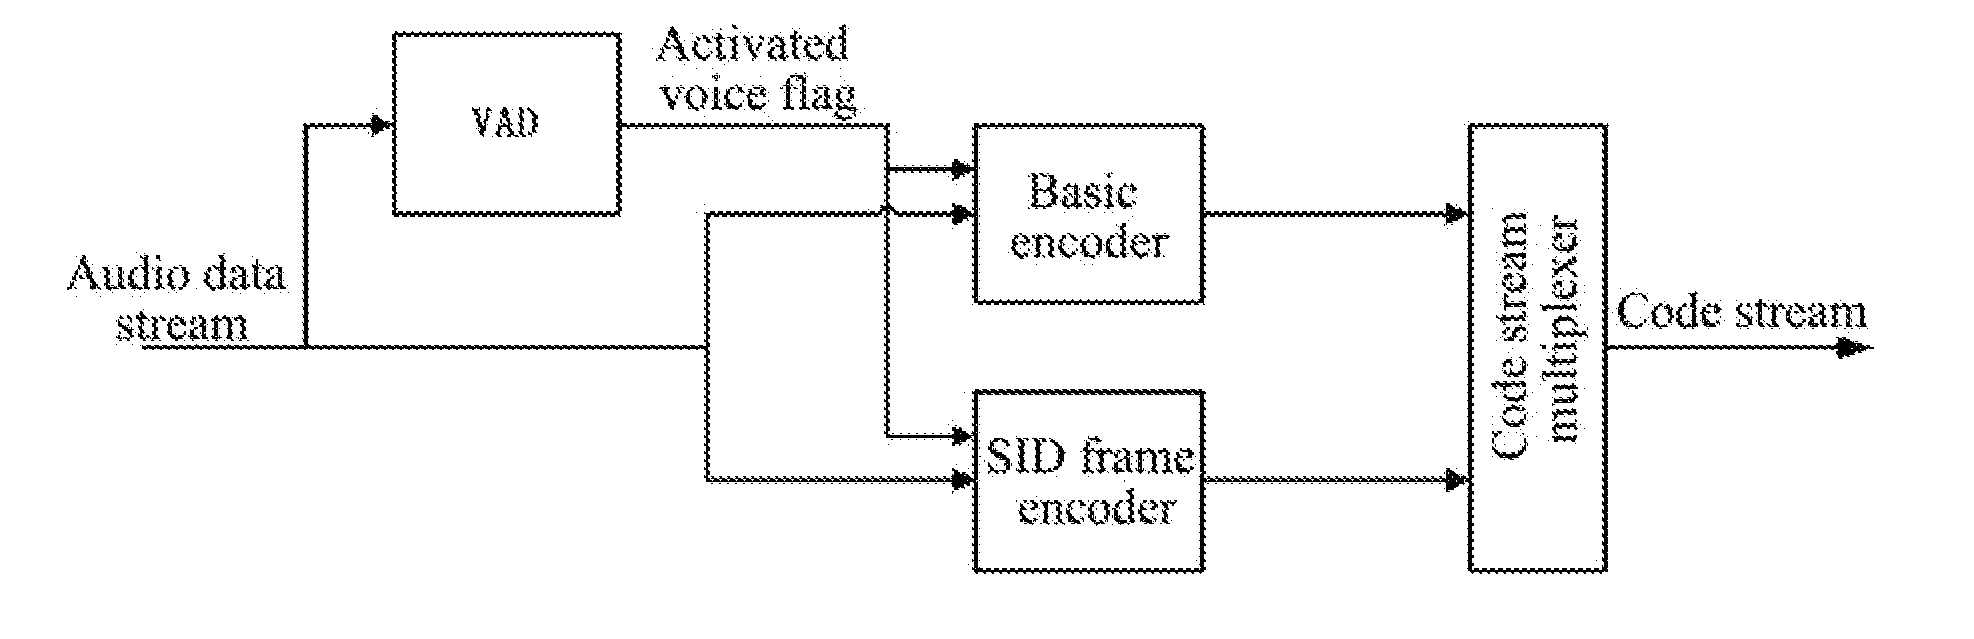 Inactive Sound Signal Parameter Estimation Method and Comfort Noise Generation Method and System